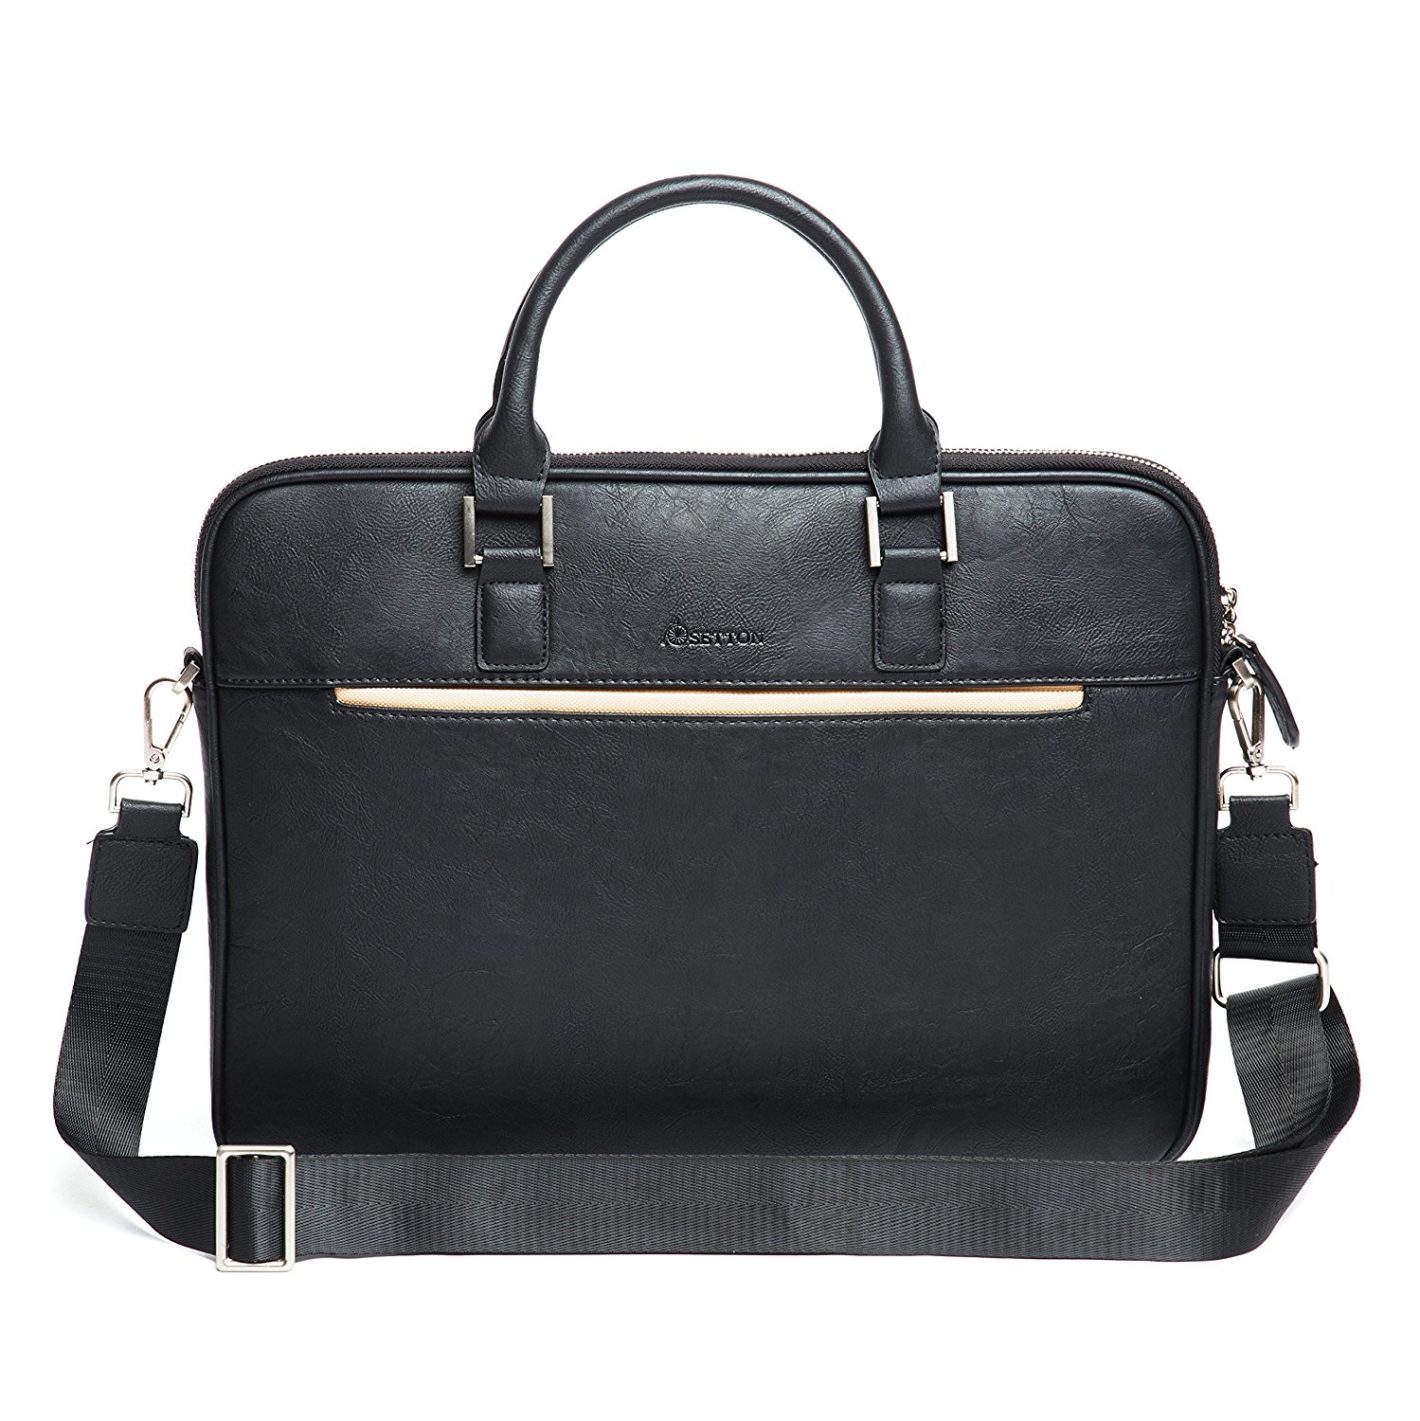 Briefcases and Messenger Bags for Vegan Men - VeganMenShoes